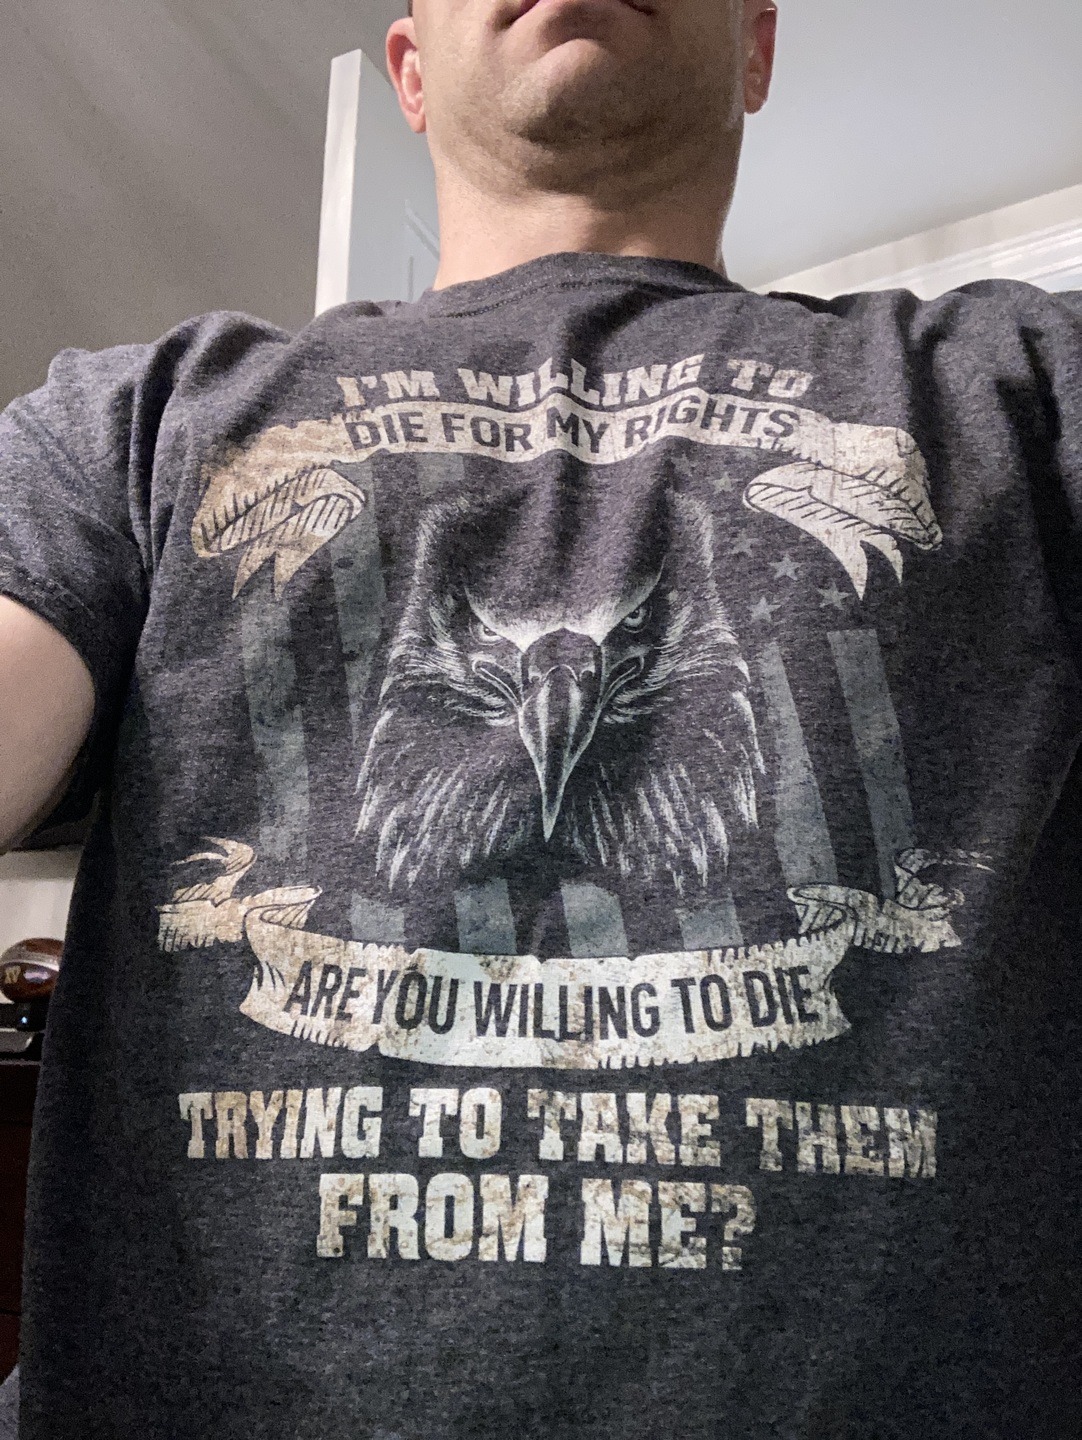 I'm willing to die for my rights are you willing to die trying to take them from me - Eagle